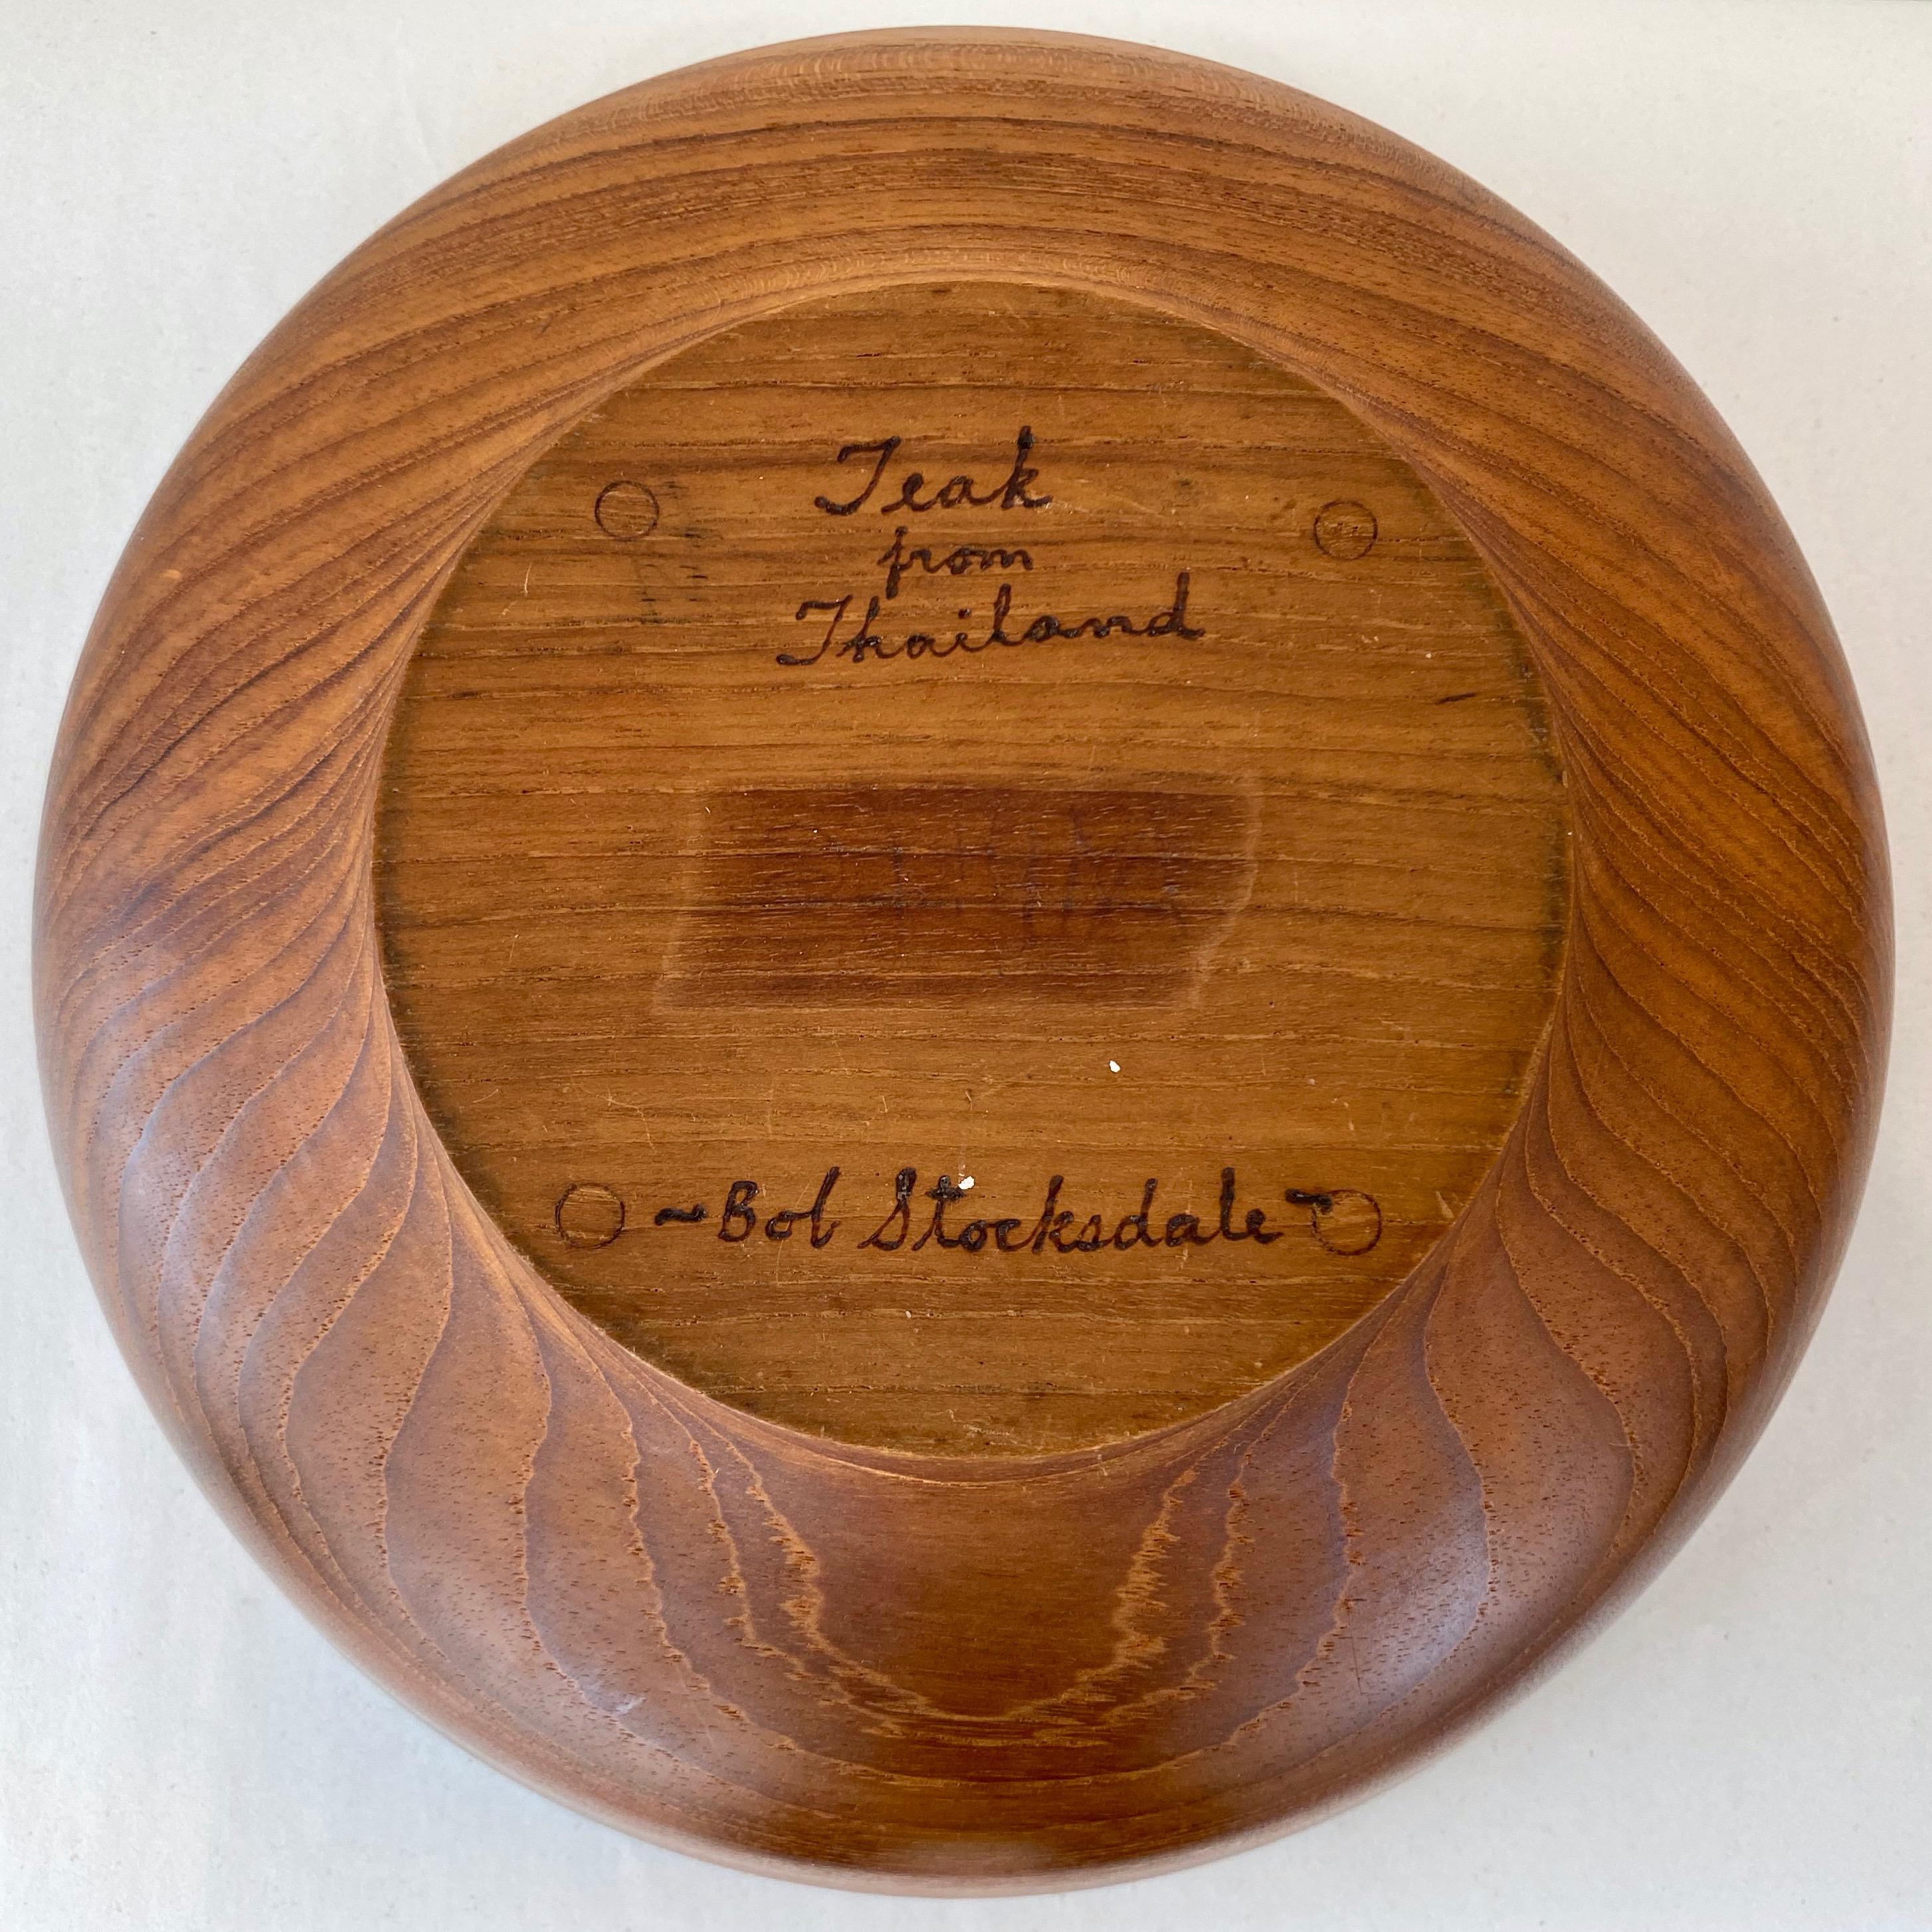 Bob Stocksdale Teak Turned Wood Bowl with Exceptional Grain Pattern, Early 1970s For Sale 11